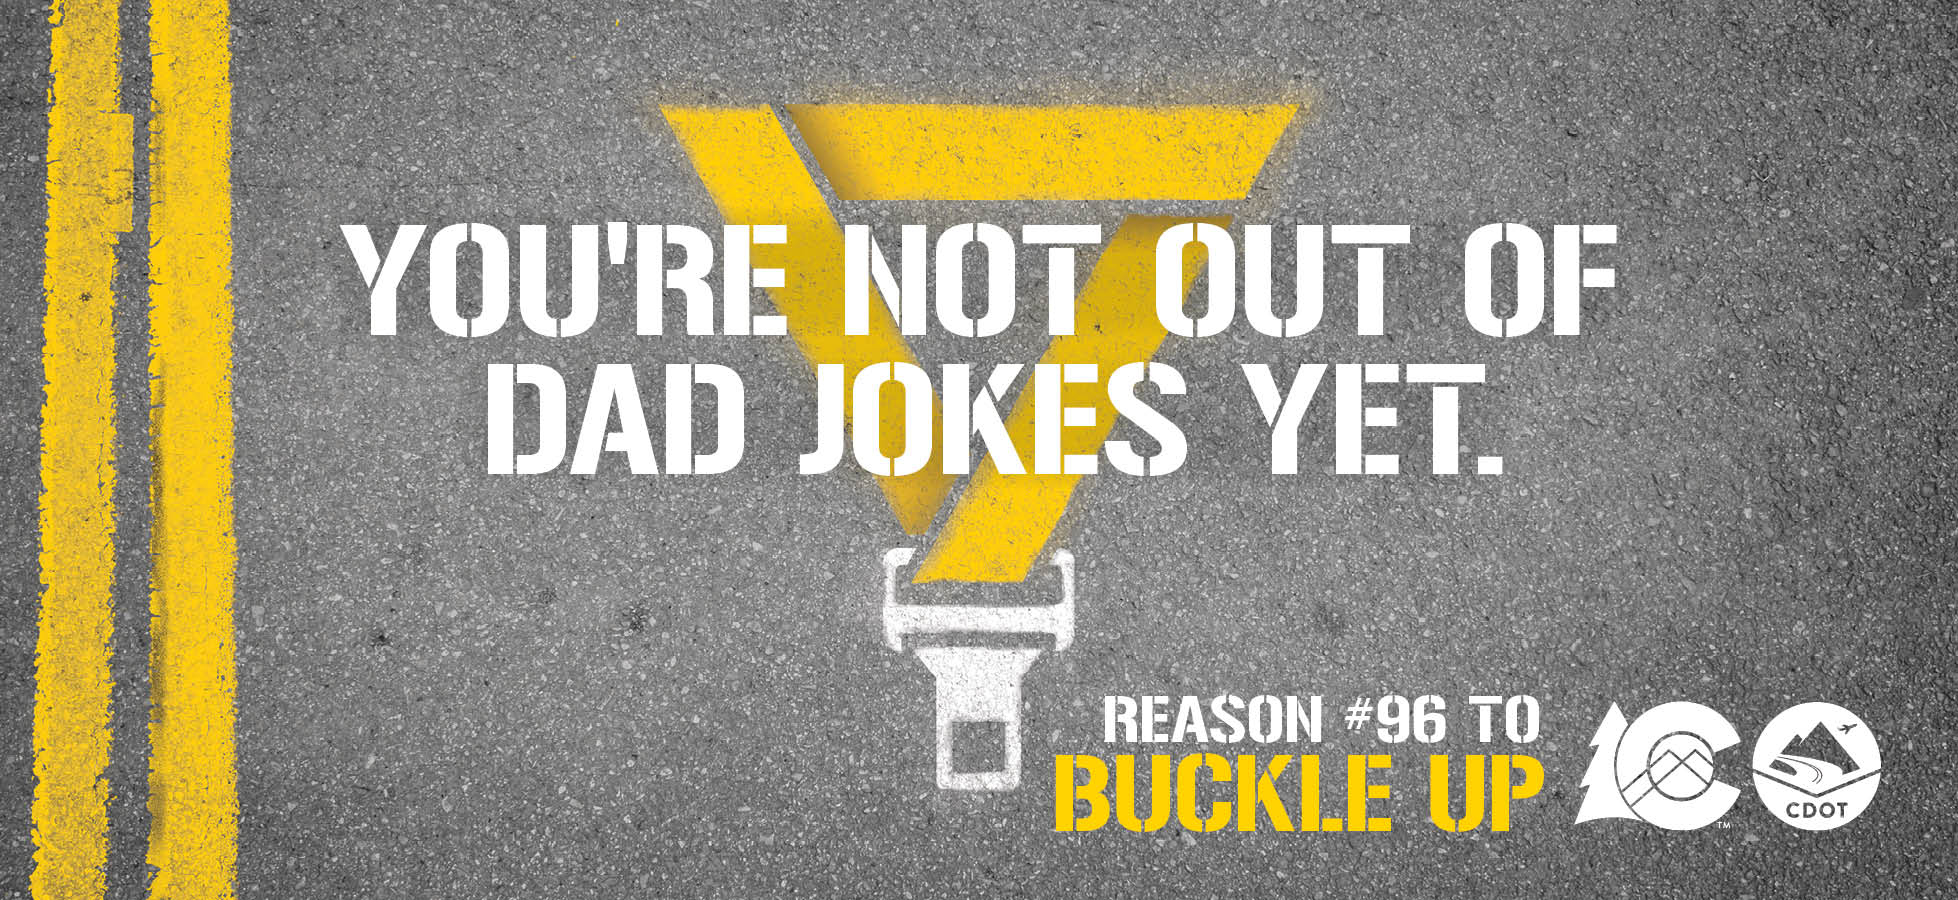 Reason 96 to Buckle Up - You're Not Out of Dad Jokes Yet graphic detail image